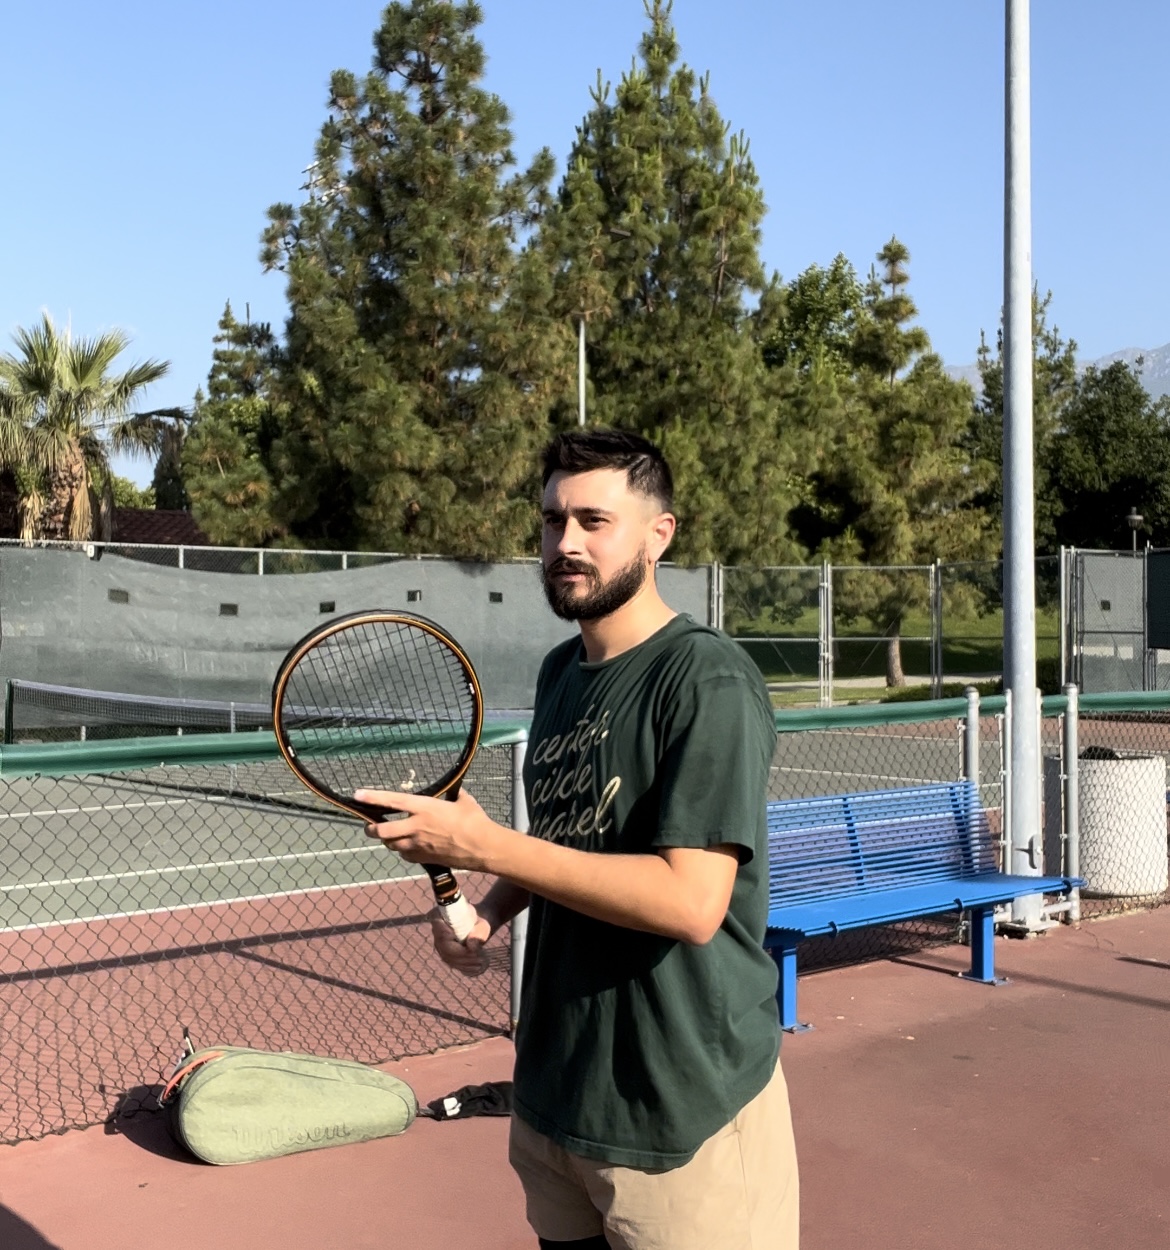 Grant J. teaches tennis lessons in Rancho Cucamonga, CA